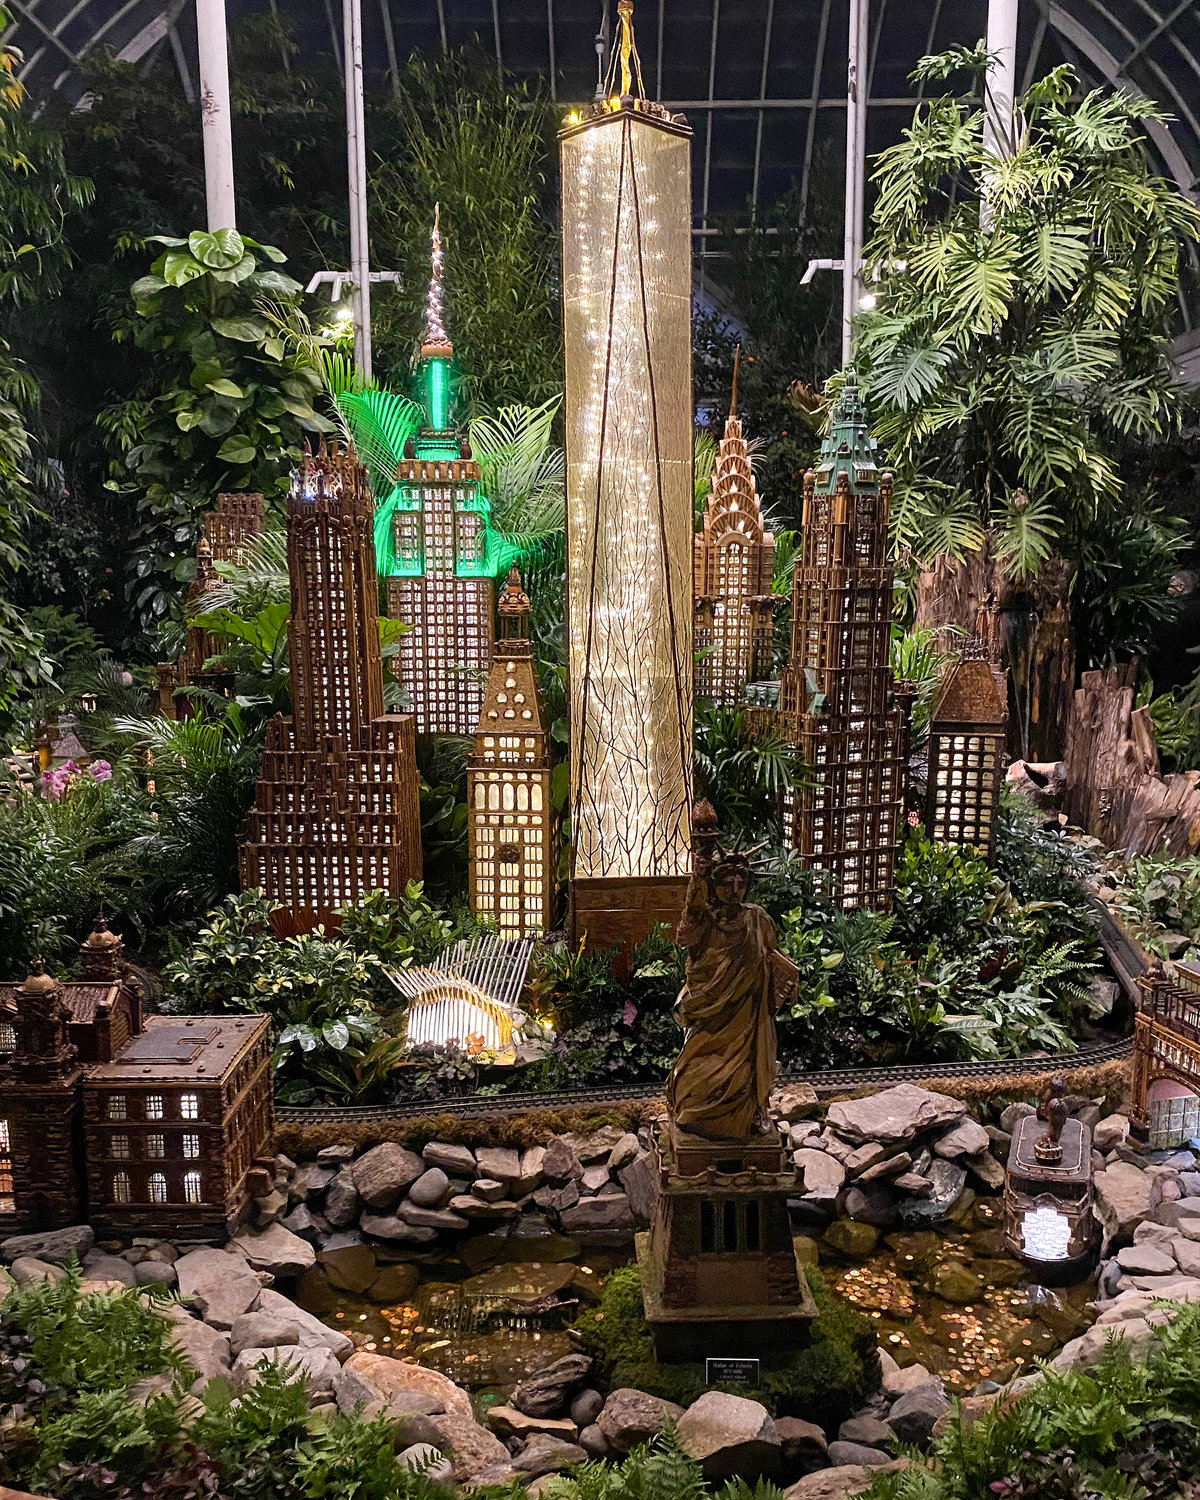 The Manhattan skyline, including the new Fulton Street station and the Freedom Tower, acts a backdrop for the Statue of Liberty at the annual New York Botanical Garden holiday train show over the holidays. This year’s show highlights wooden renditions of the city’s numerous bridges and many famous structures and homes. There was also a model of the Van Cortlandt House. The show continues through Jan. 22.